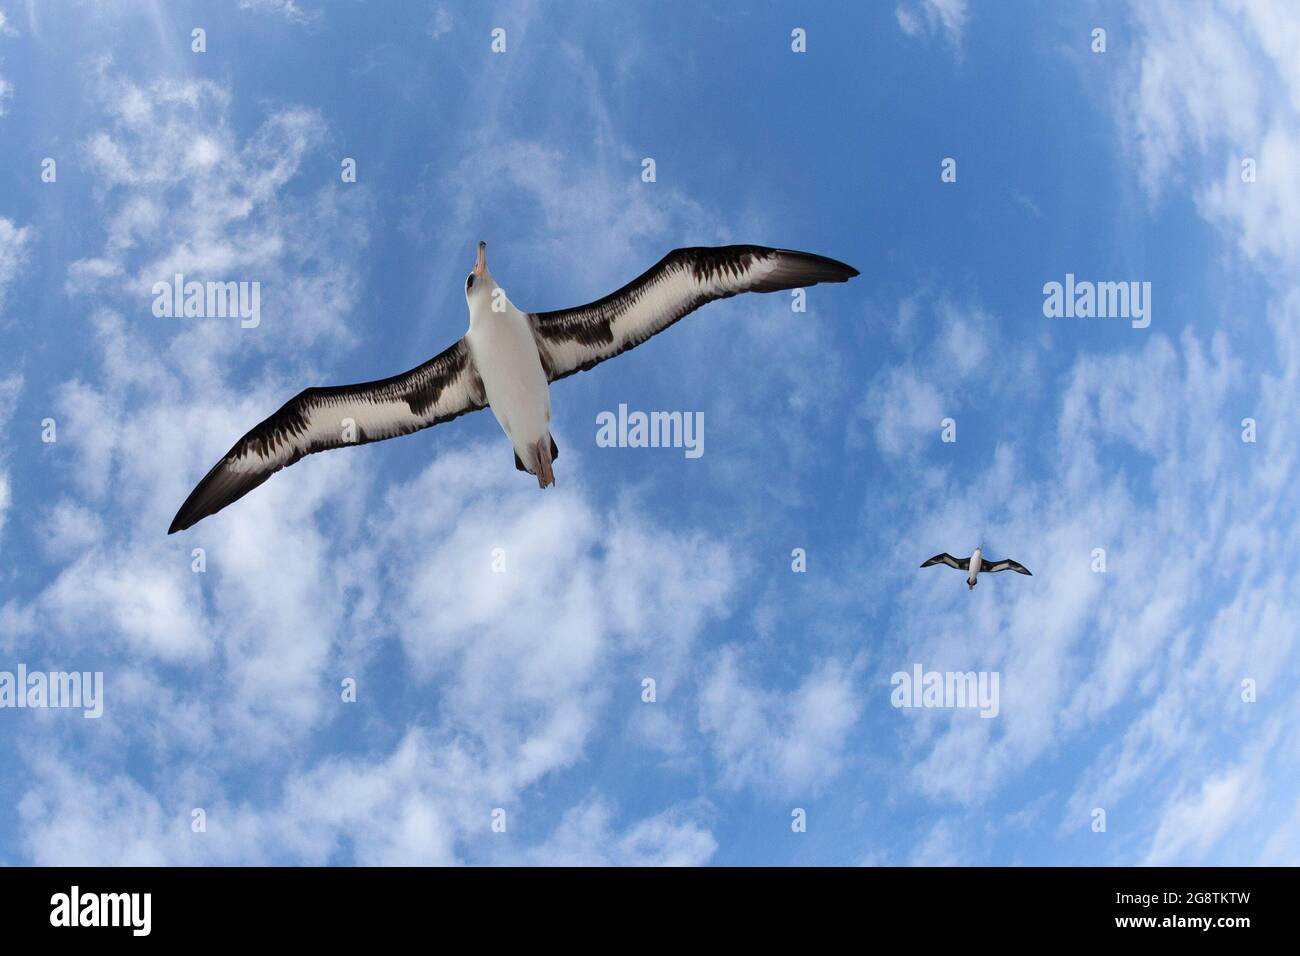 Laysan Albatrosses flying through blue sky with clouds over Midway Atoll in the north Pacific, Papahanaumokuakea Marine National Monument Stock Photo